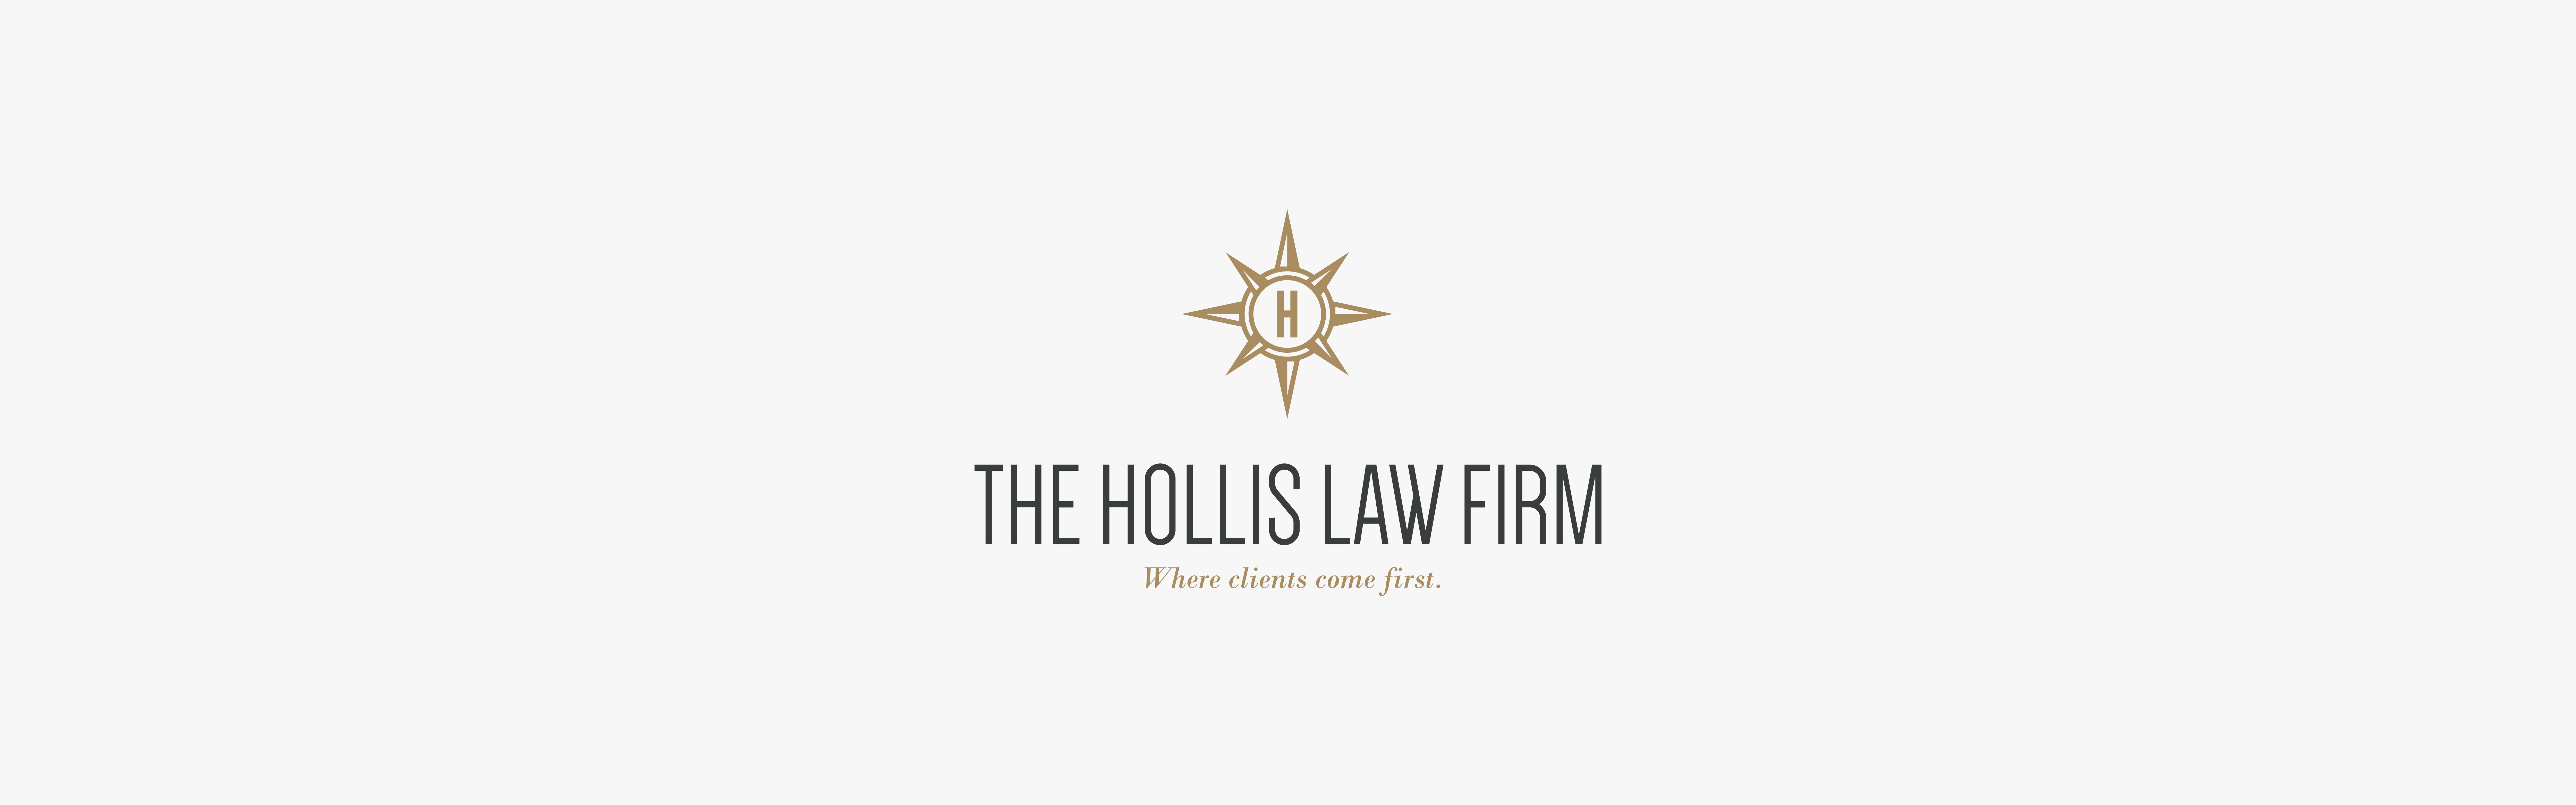 Logo of The Hollis Law Firm with the tagline "where clients come first," featuring a compass-like symbol above the company name.